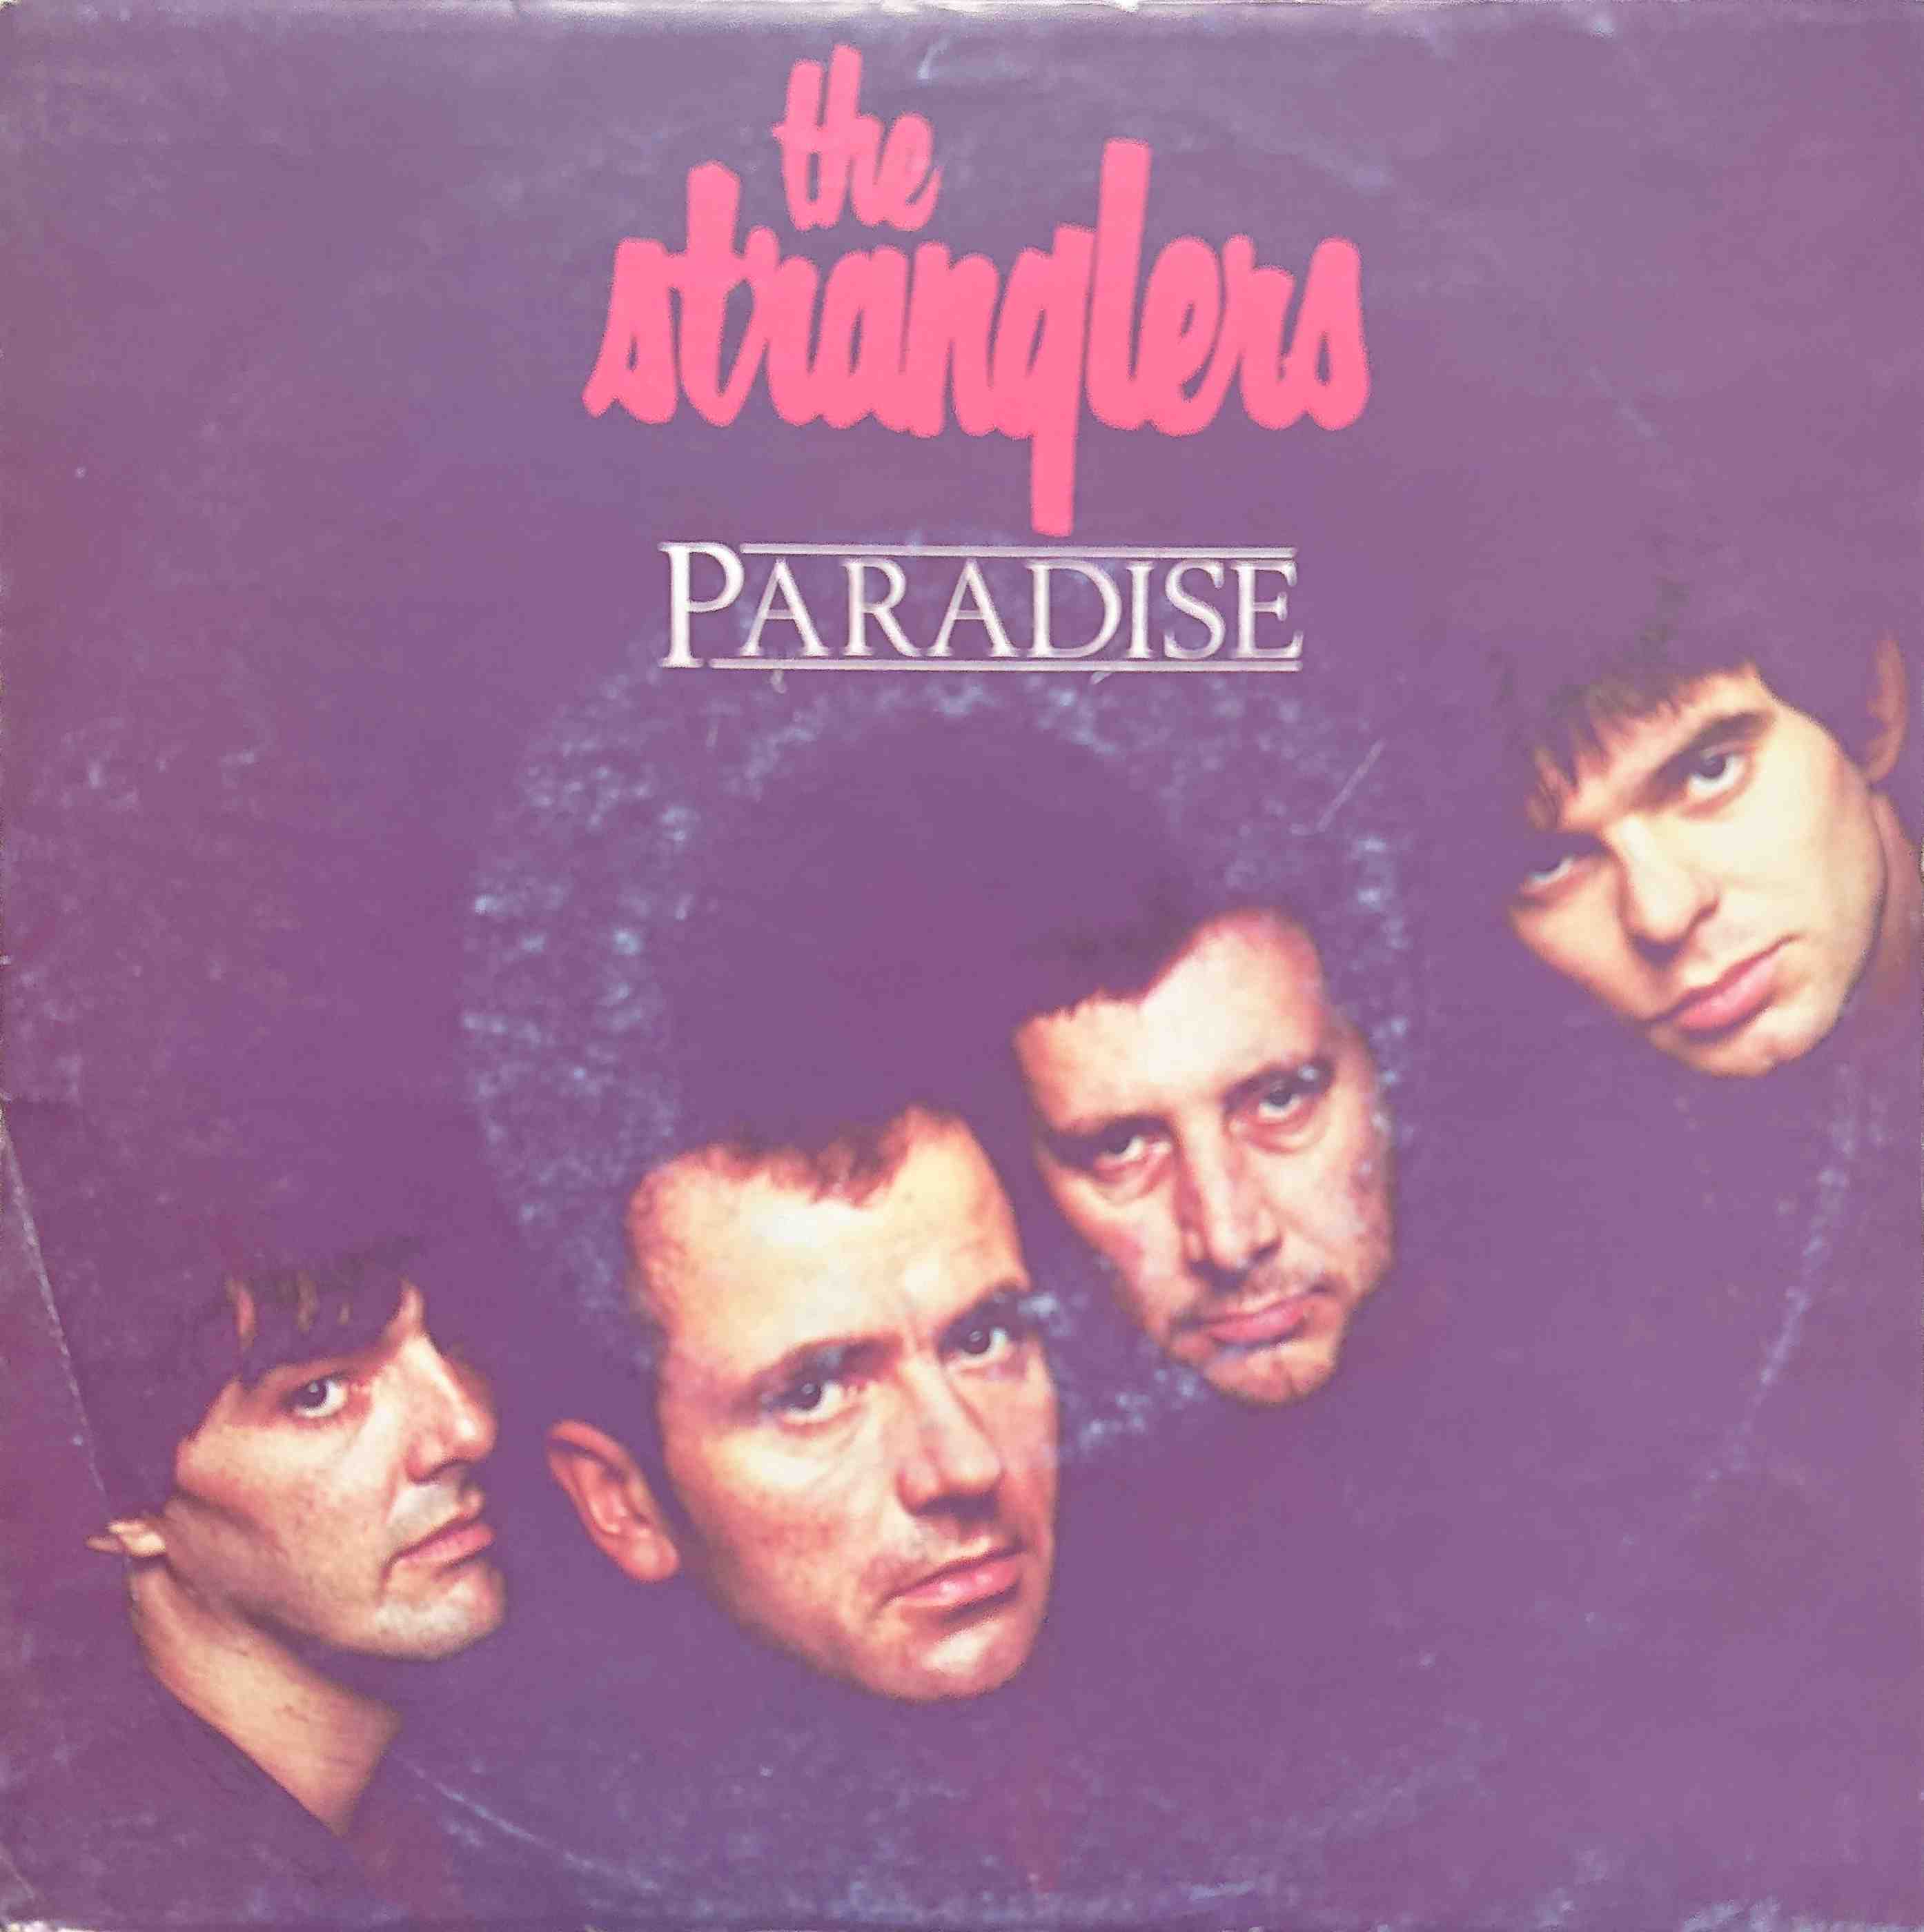 Picture of Paradise by artist The Stranglers from The Stranglers singles